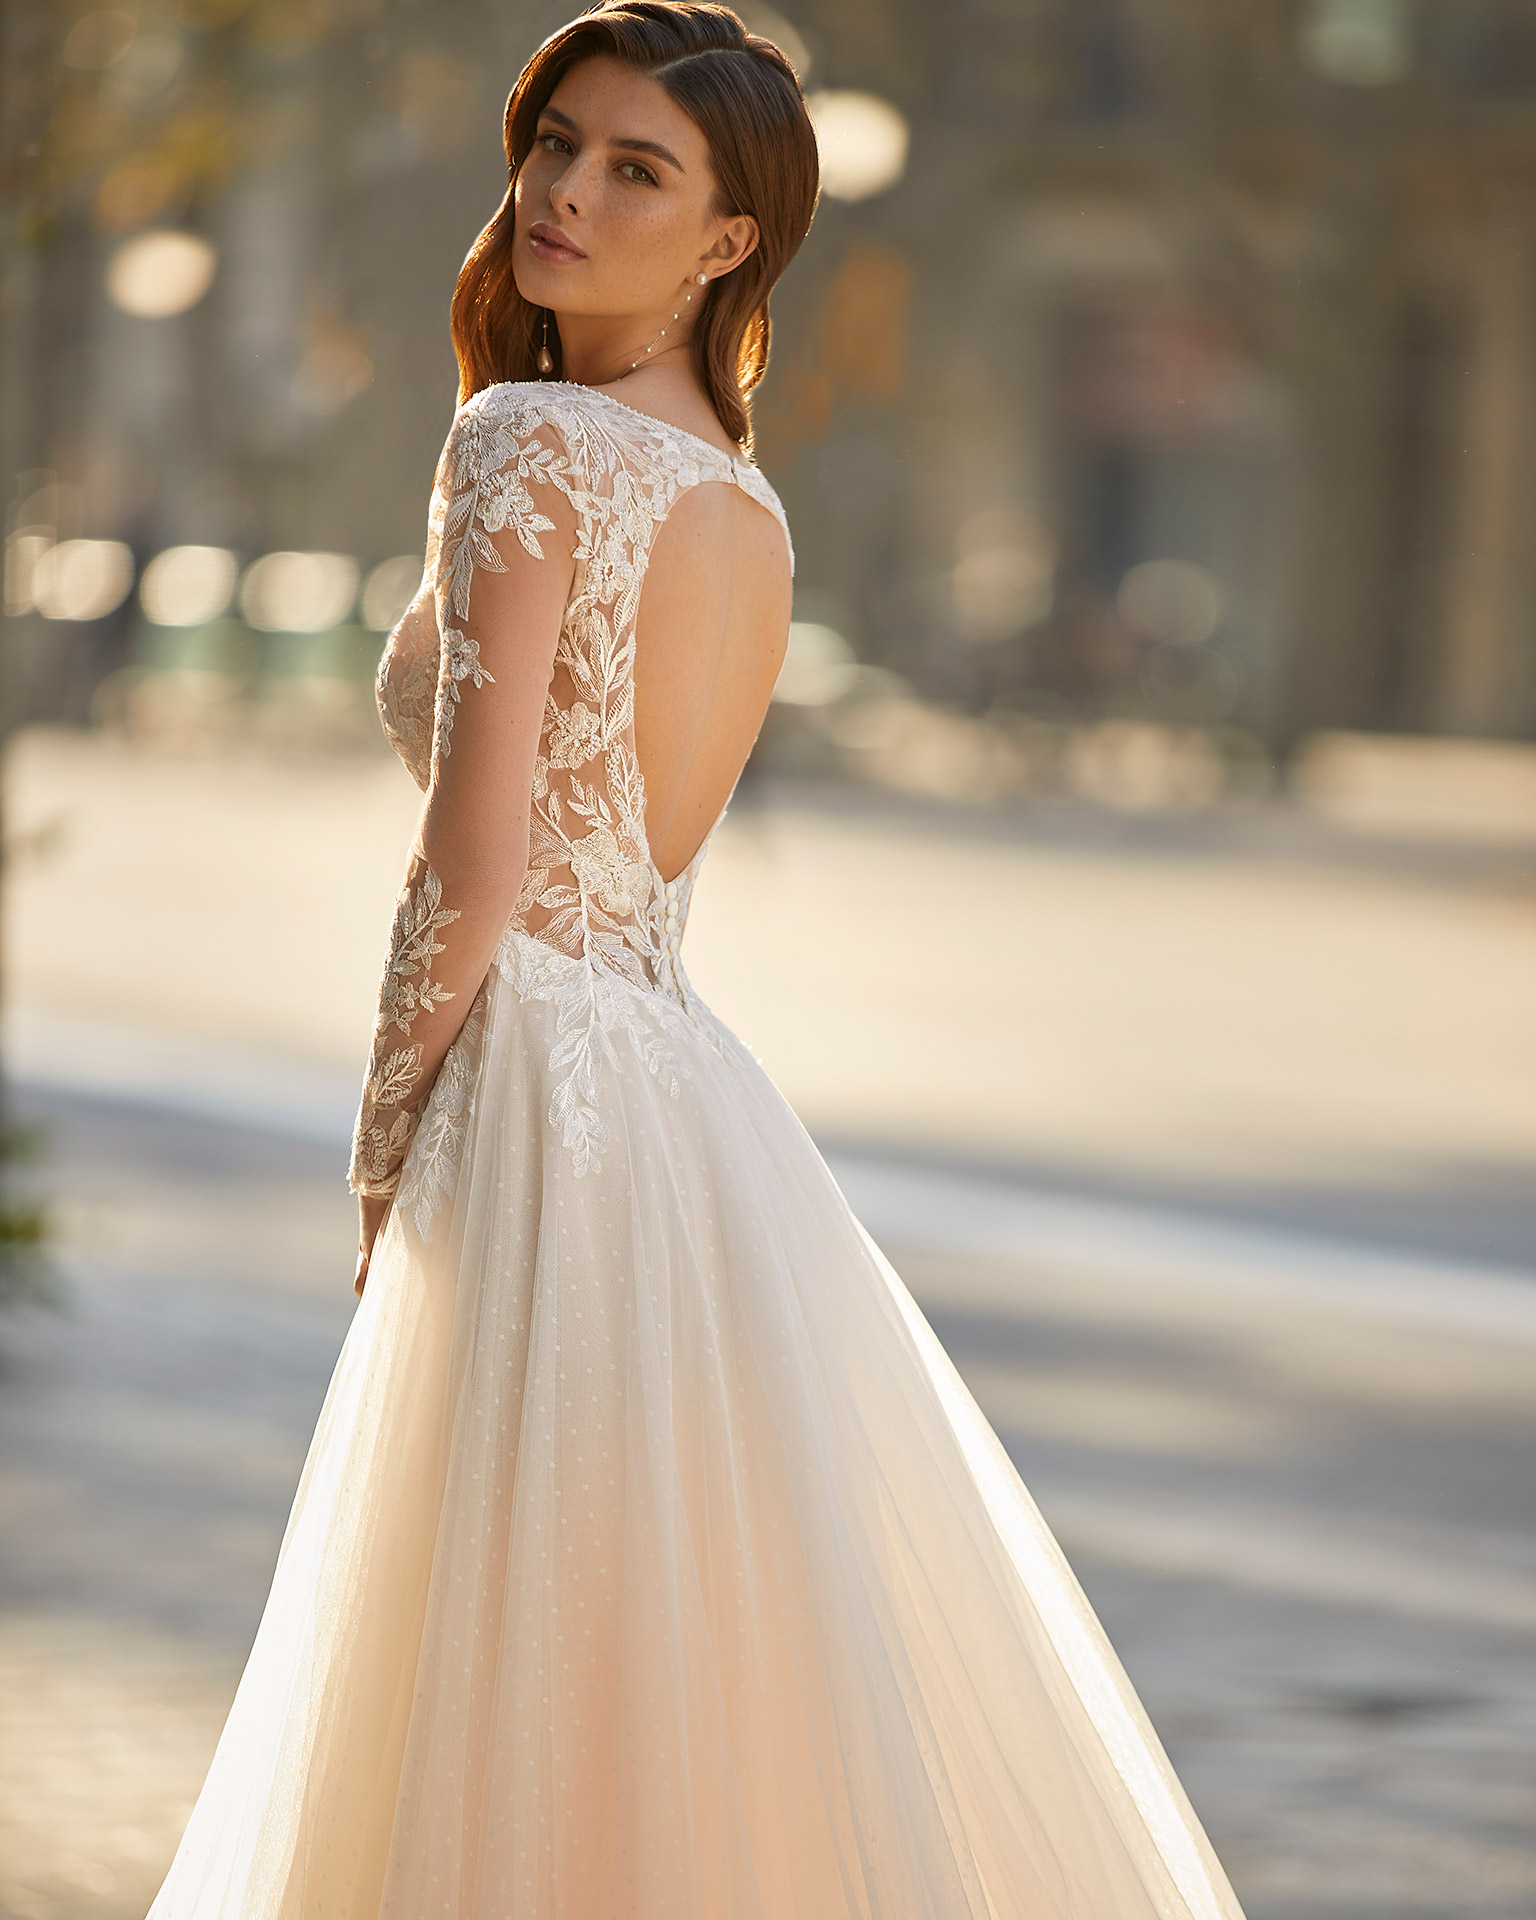 Romantic princess-style wedding dress, made of dot tulle and lace appliqués; with a deep-plunge neckline with beadwork detail, a back with a round slit, and long tulle and lace sleeves. Unique Luna Novias design made of dot tulle and lace with beadwork. LUNA_NOVIAS.